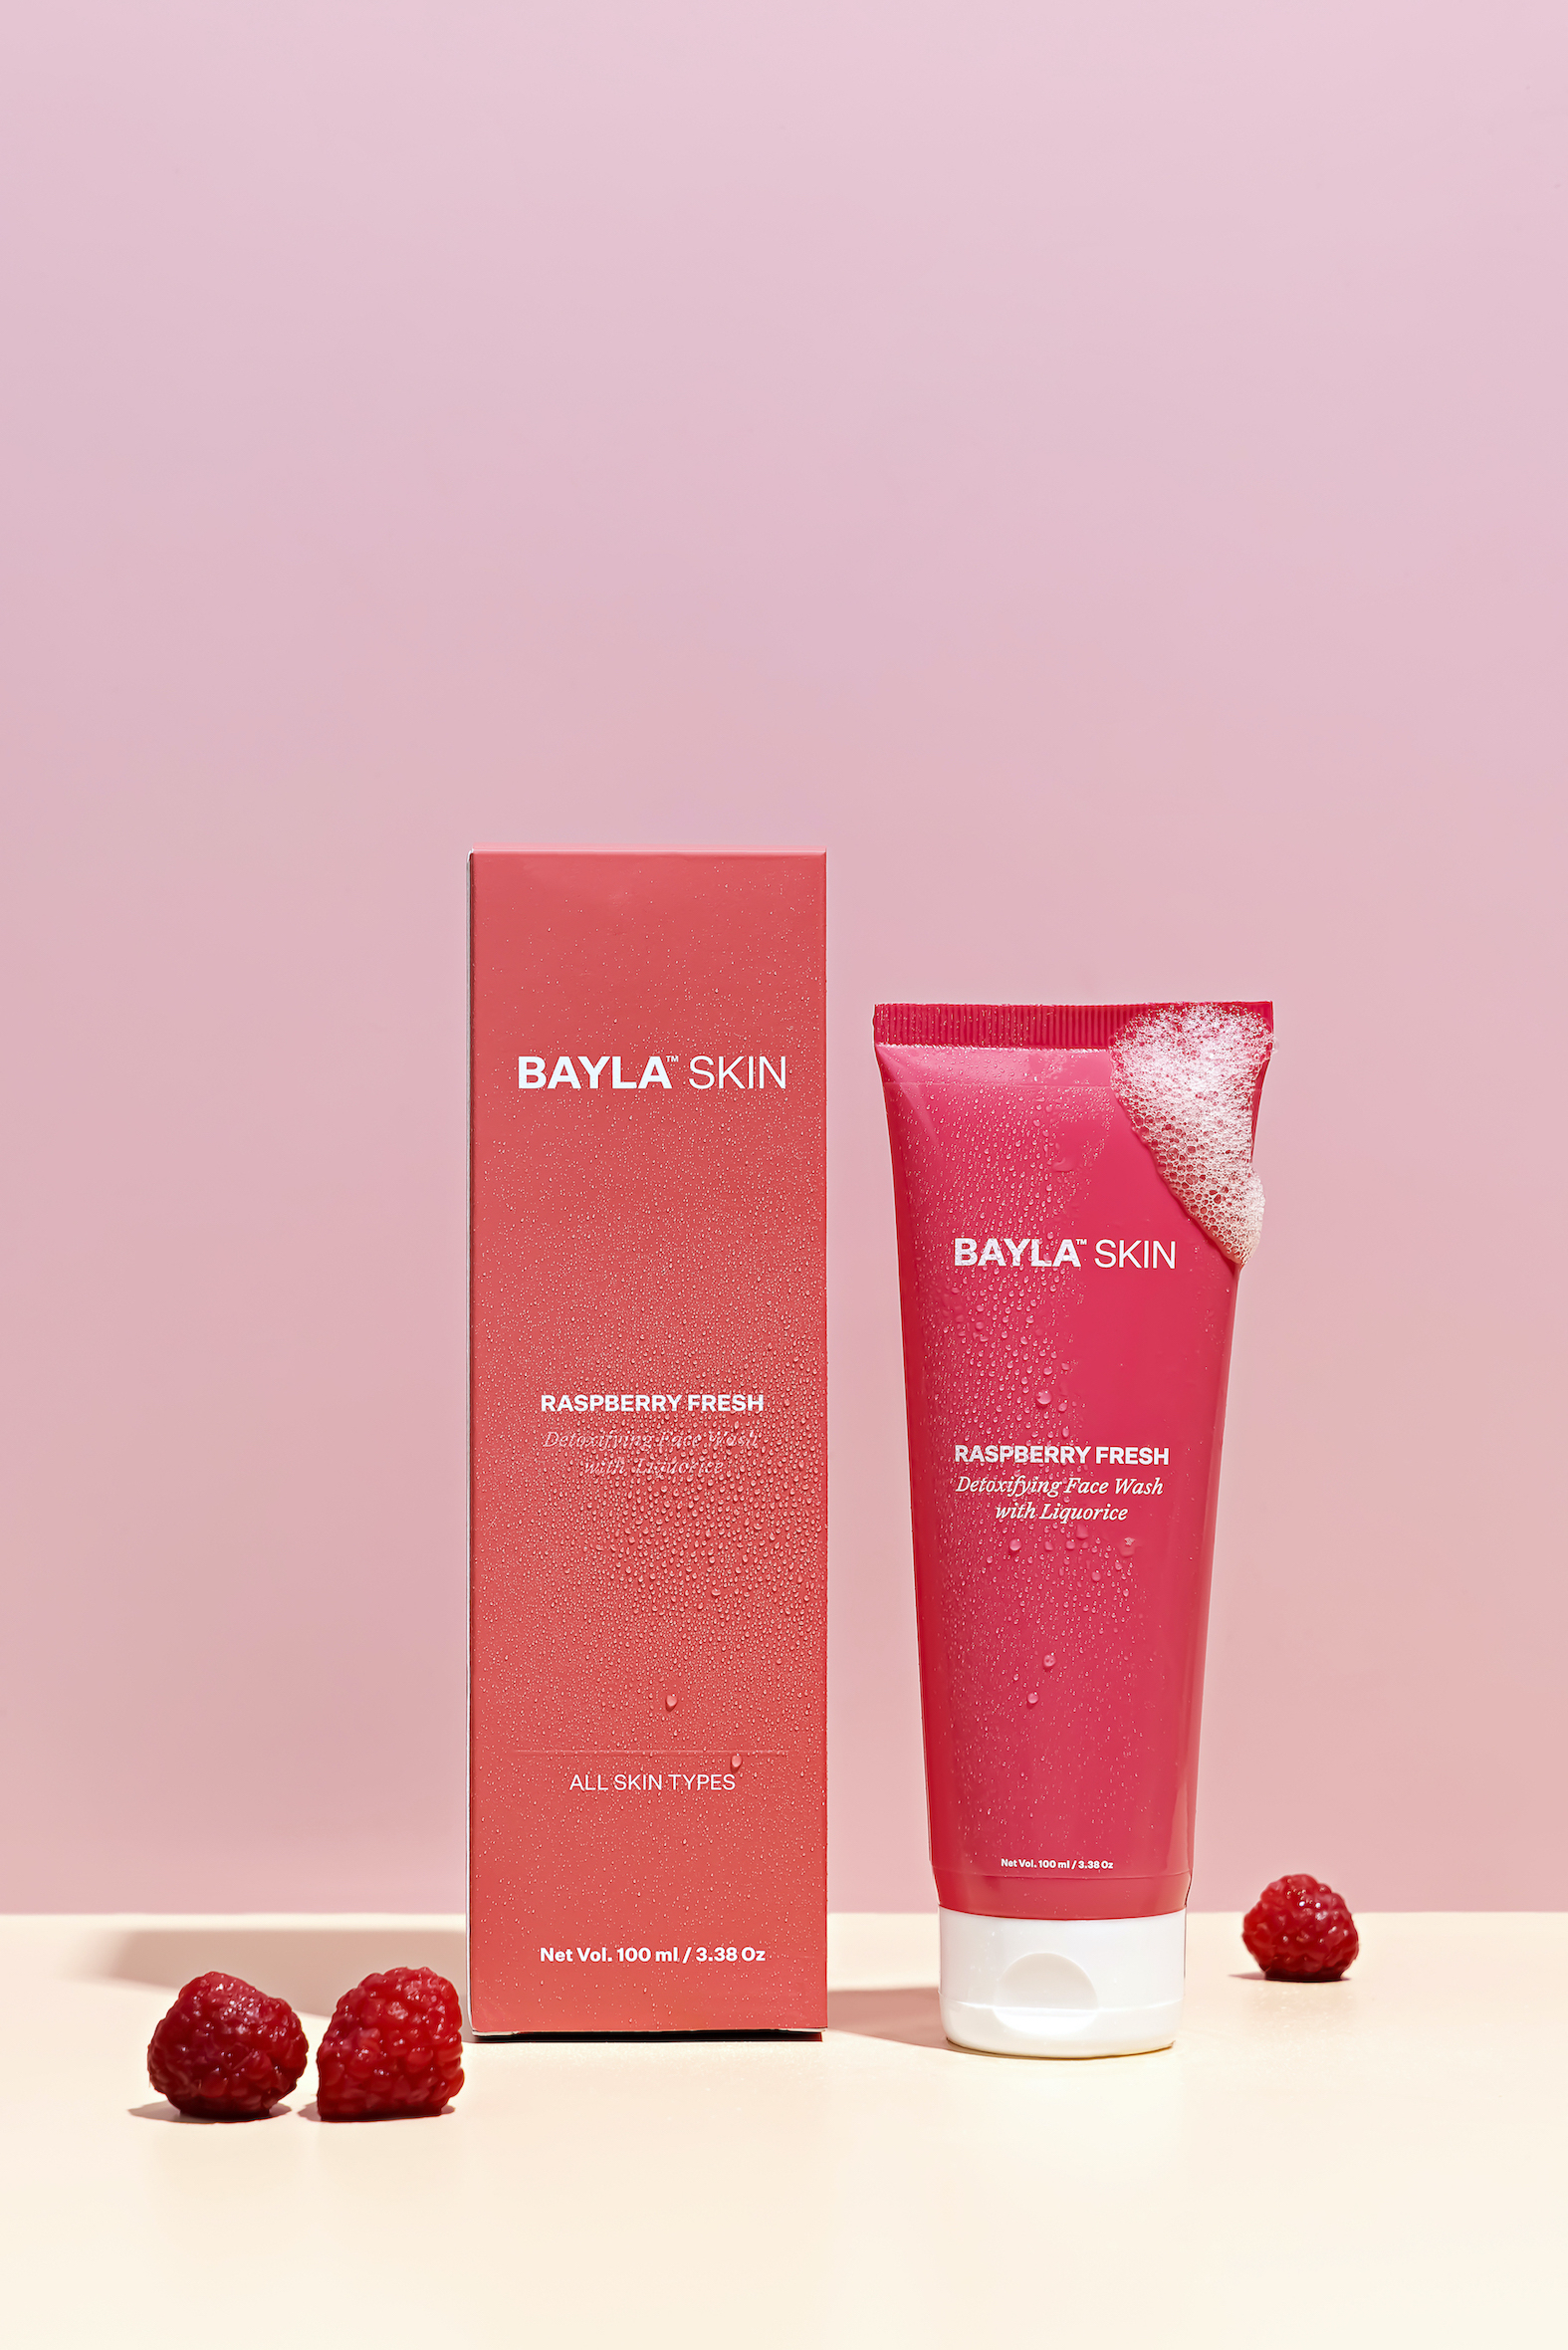 Bayla Skin Offers Thoughtful and Cruelty-Free Skincare Gifts for Mother's Day